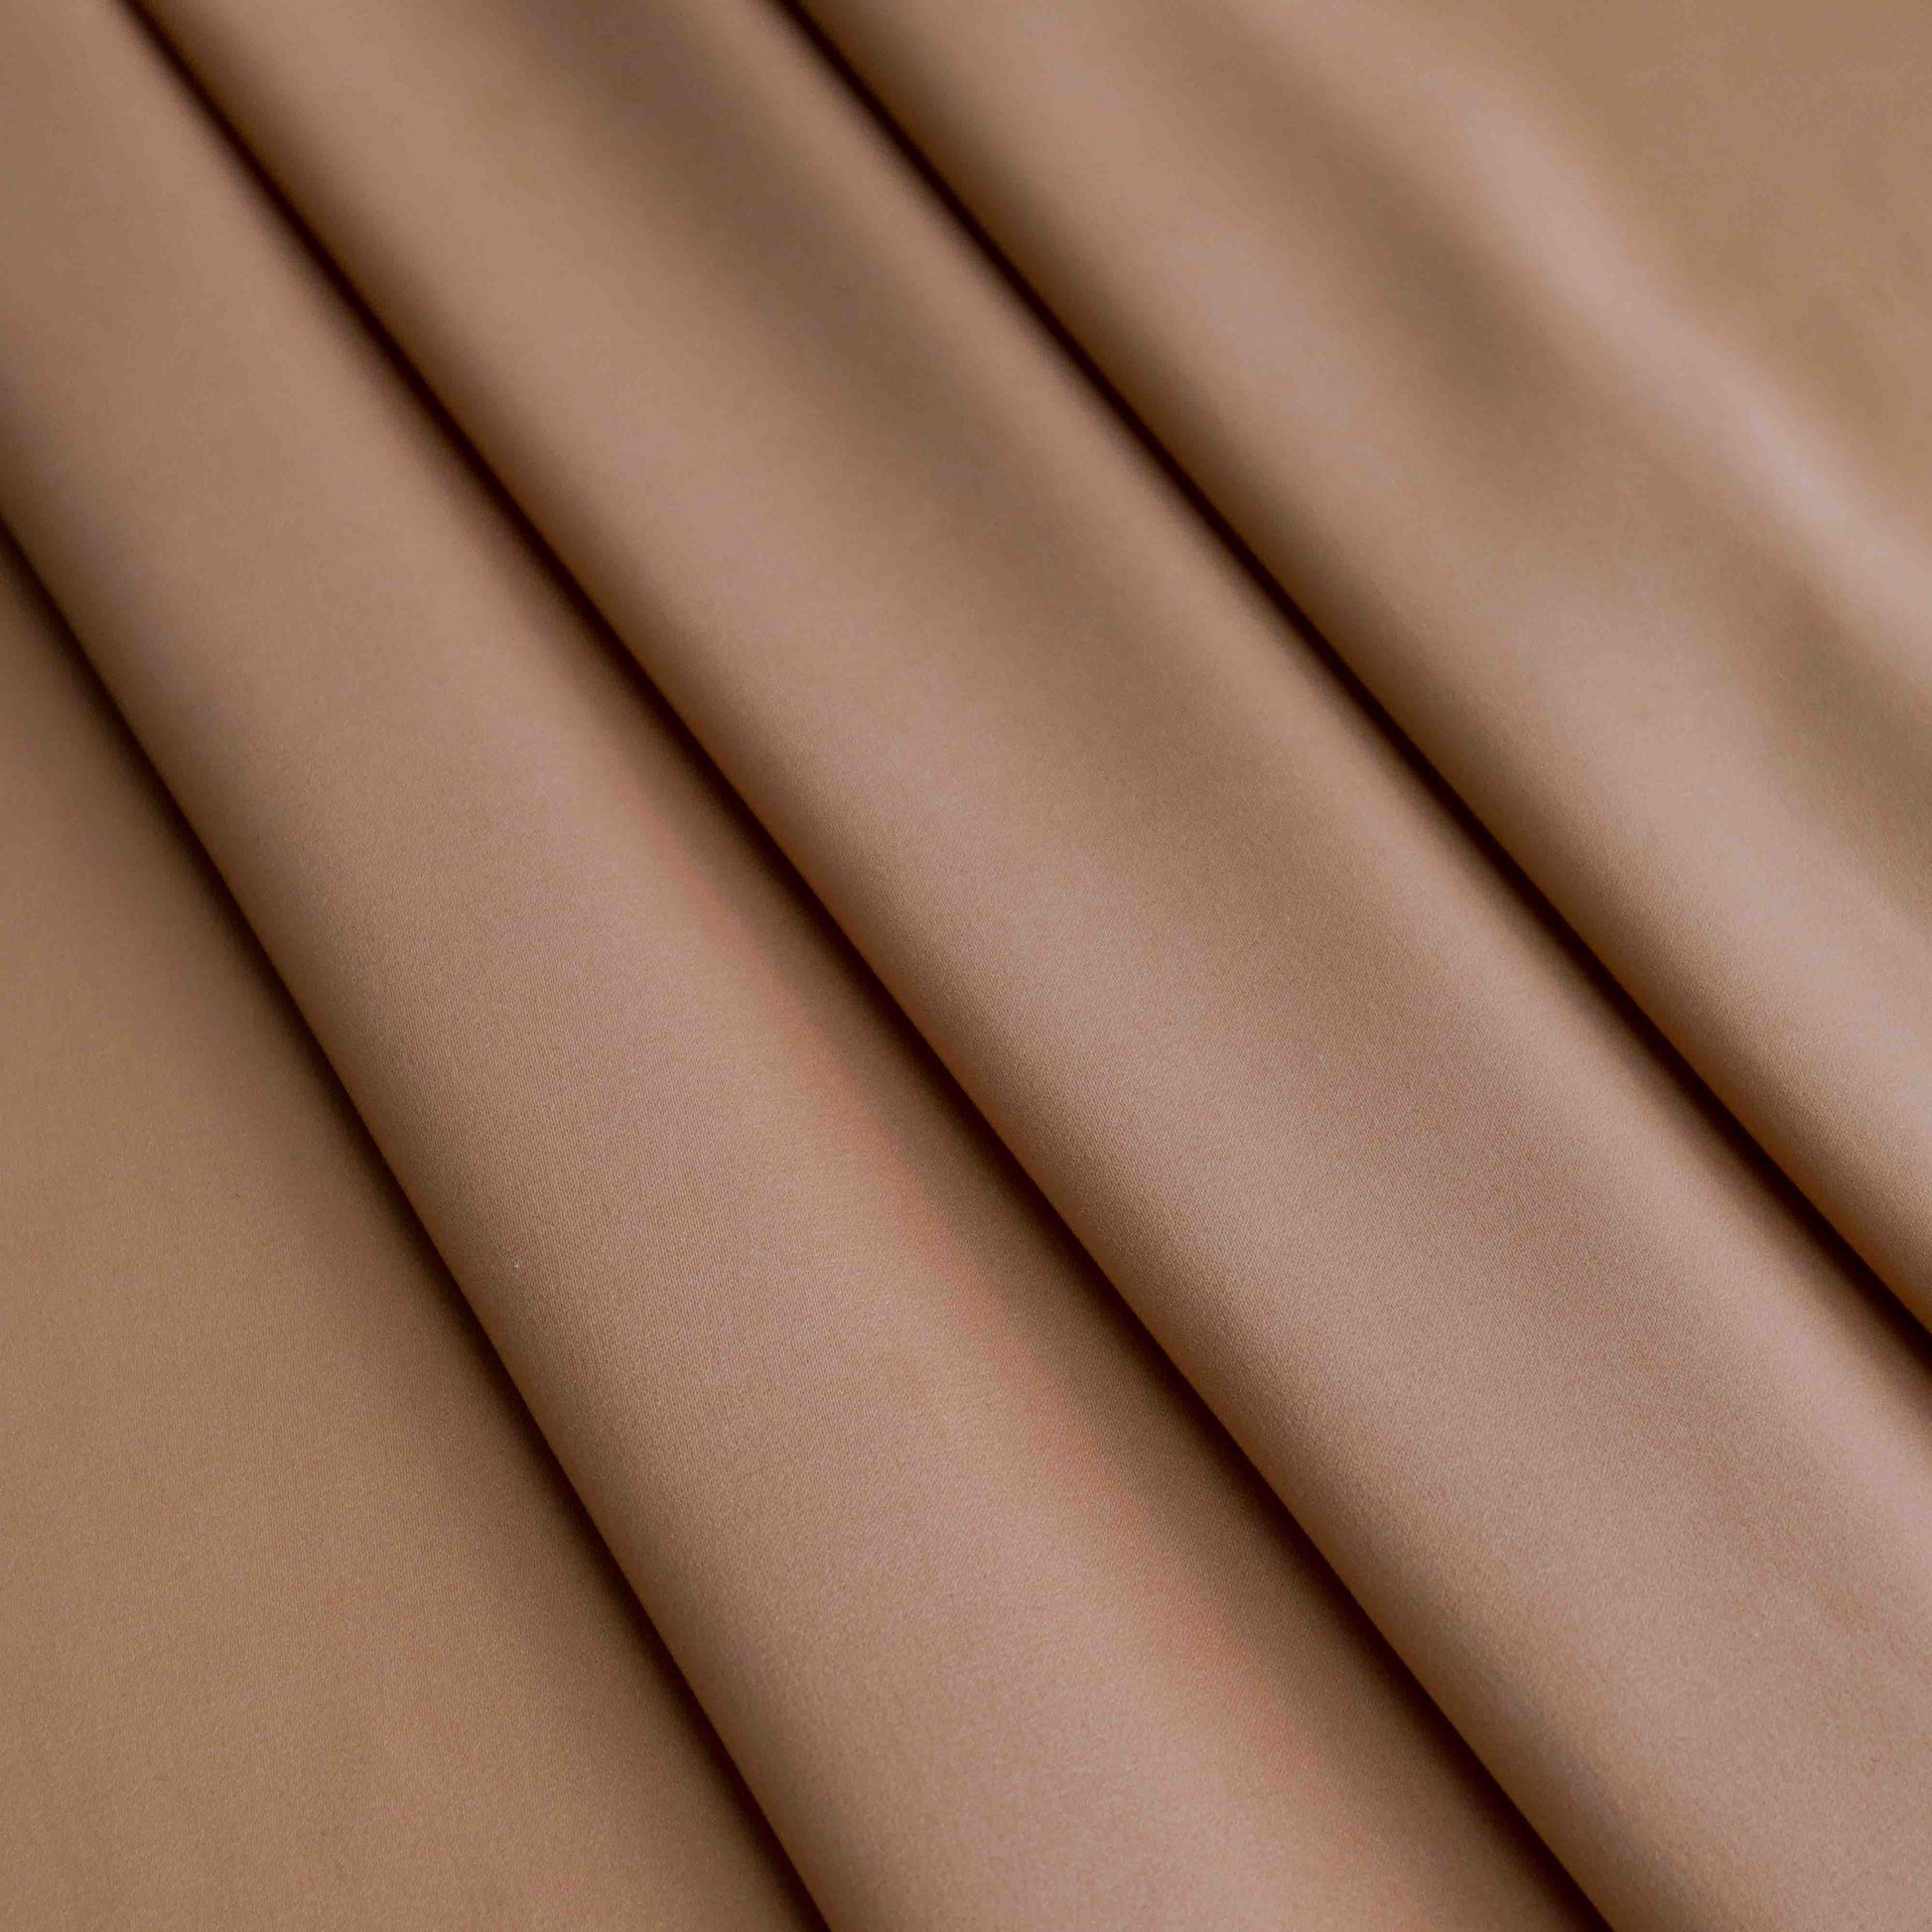 An European lightweight polyester satin in Rouge Nude. This fabric has a silky hand feel, making it smooth to the touch, elegant and light. This fabric has a matte finish, is wrinkle resistant and has no stretch.